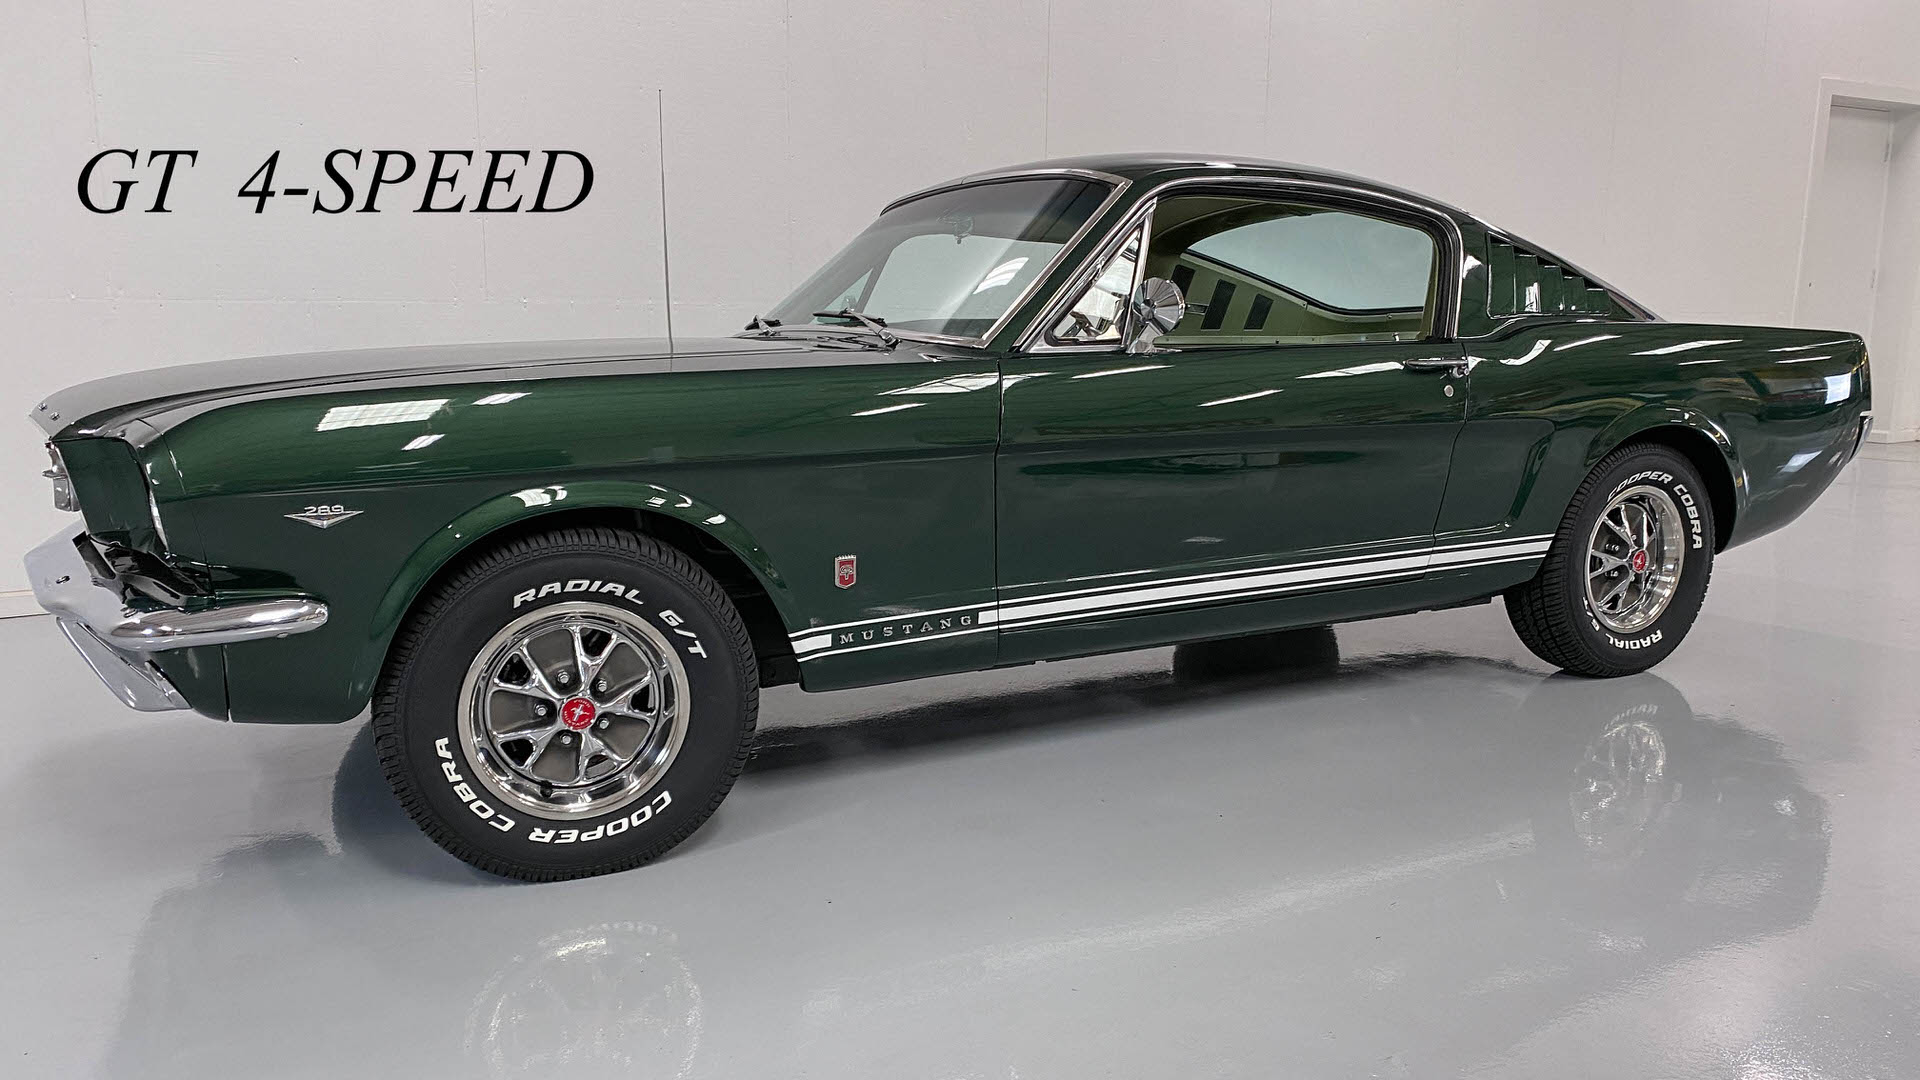 1966 Mustang fastback GT Ivy Green Pony Interior 4-speed 289 A-code